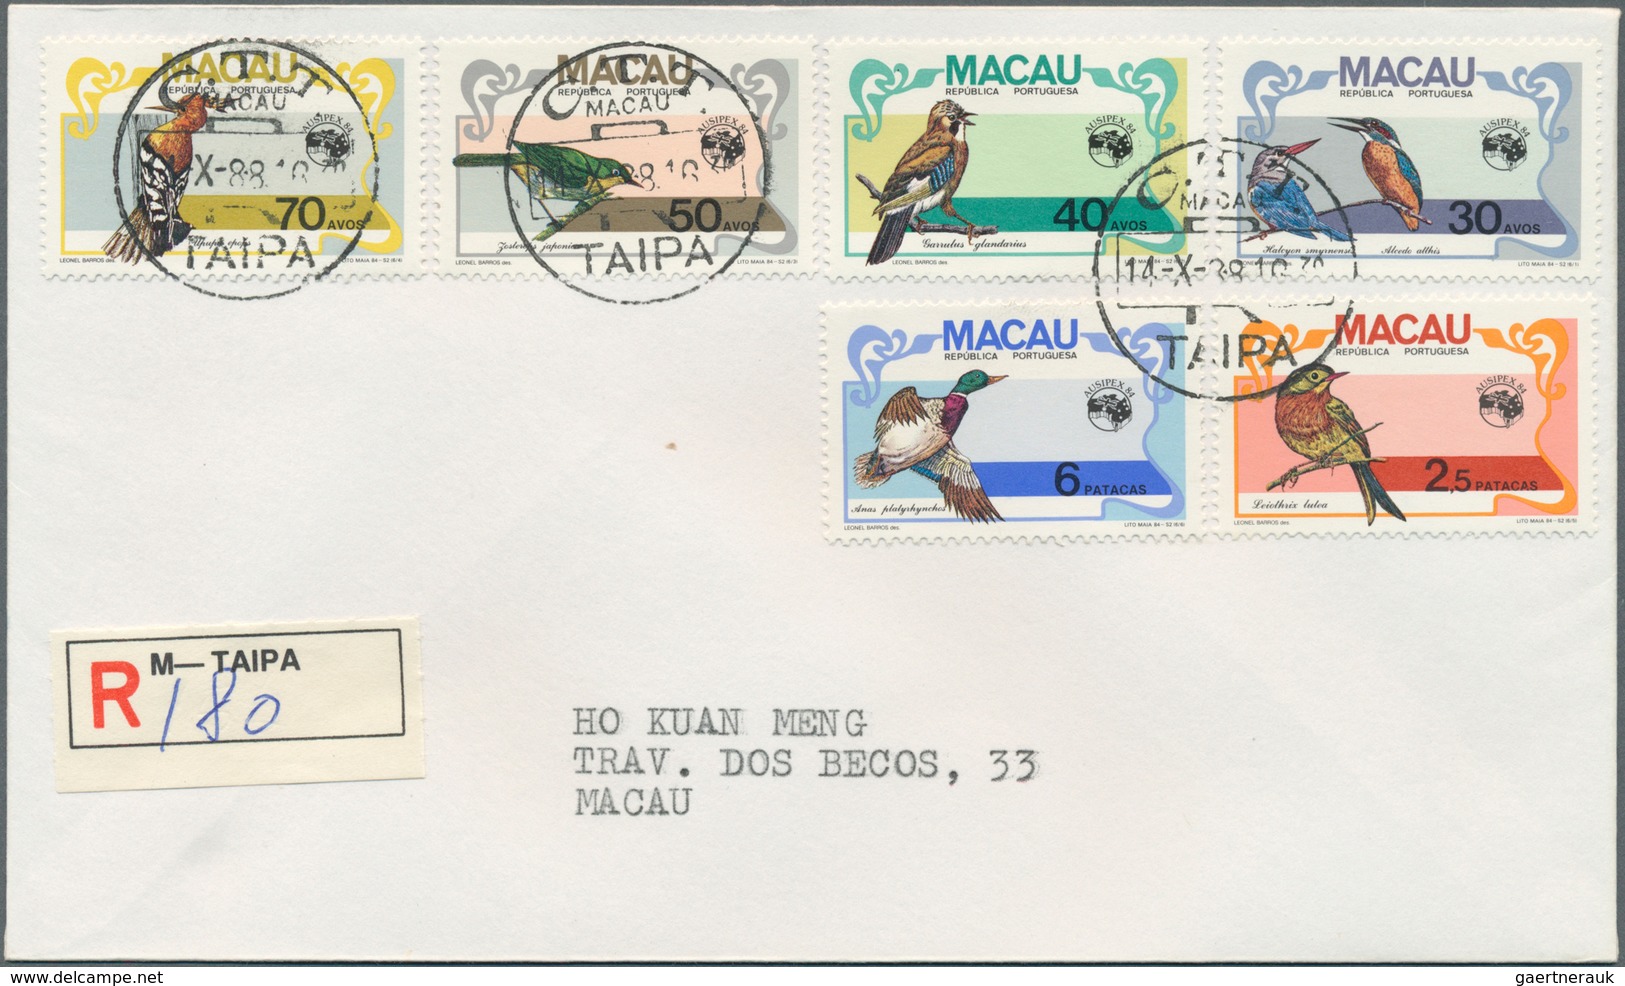 23508 Macau: 1976/88 complete, each set or single issue on registered local covers (53) used "TAIPA" in 19